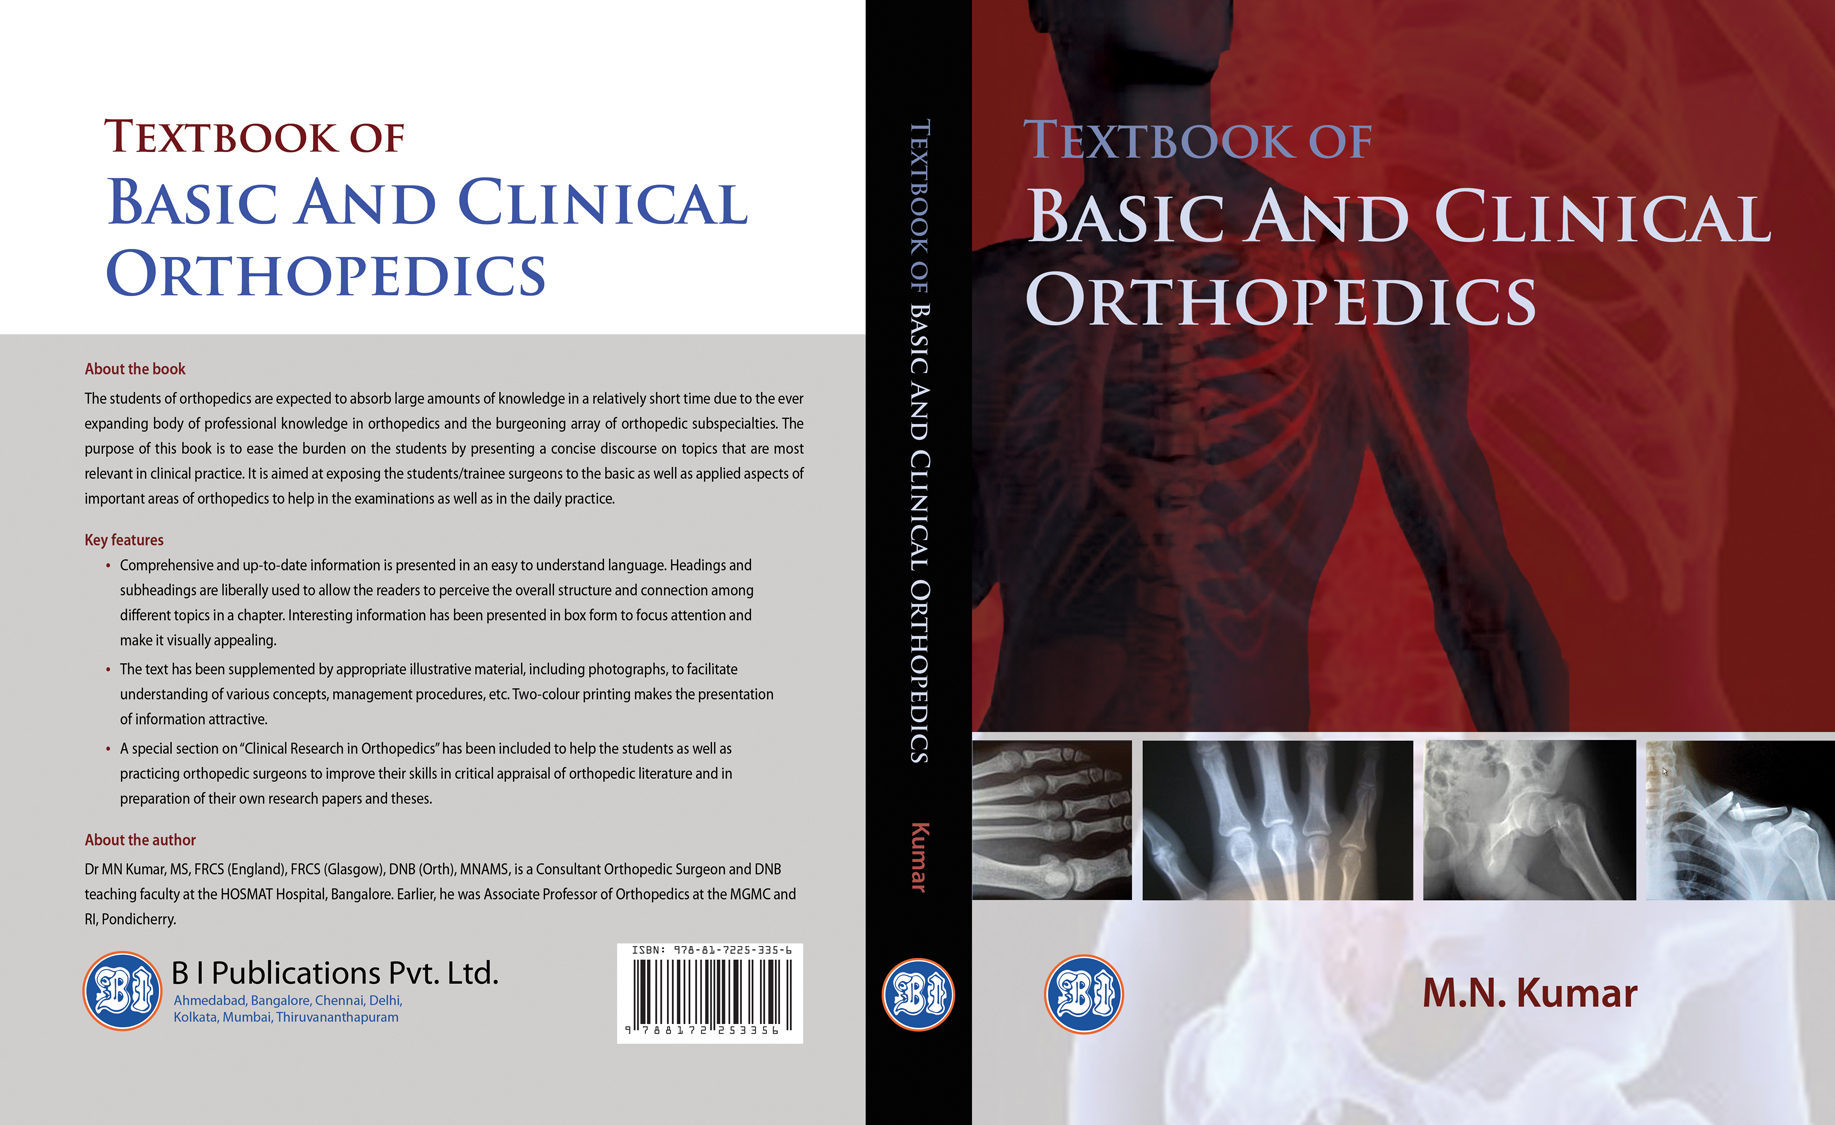 Textbook of Basic and Clinical Orthopedics By Dr.M.N.Kumar